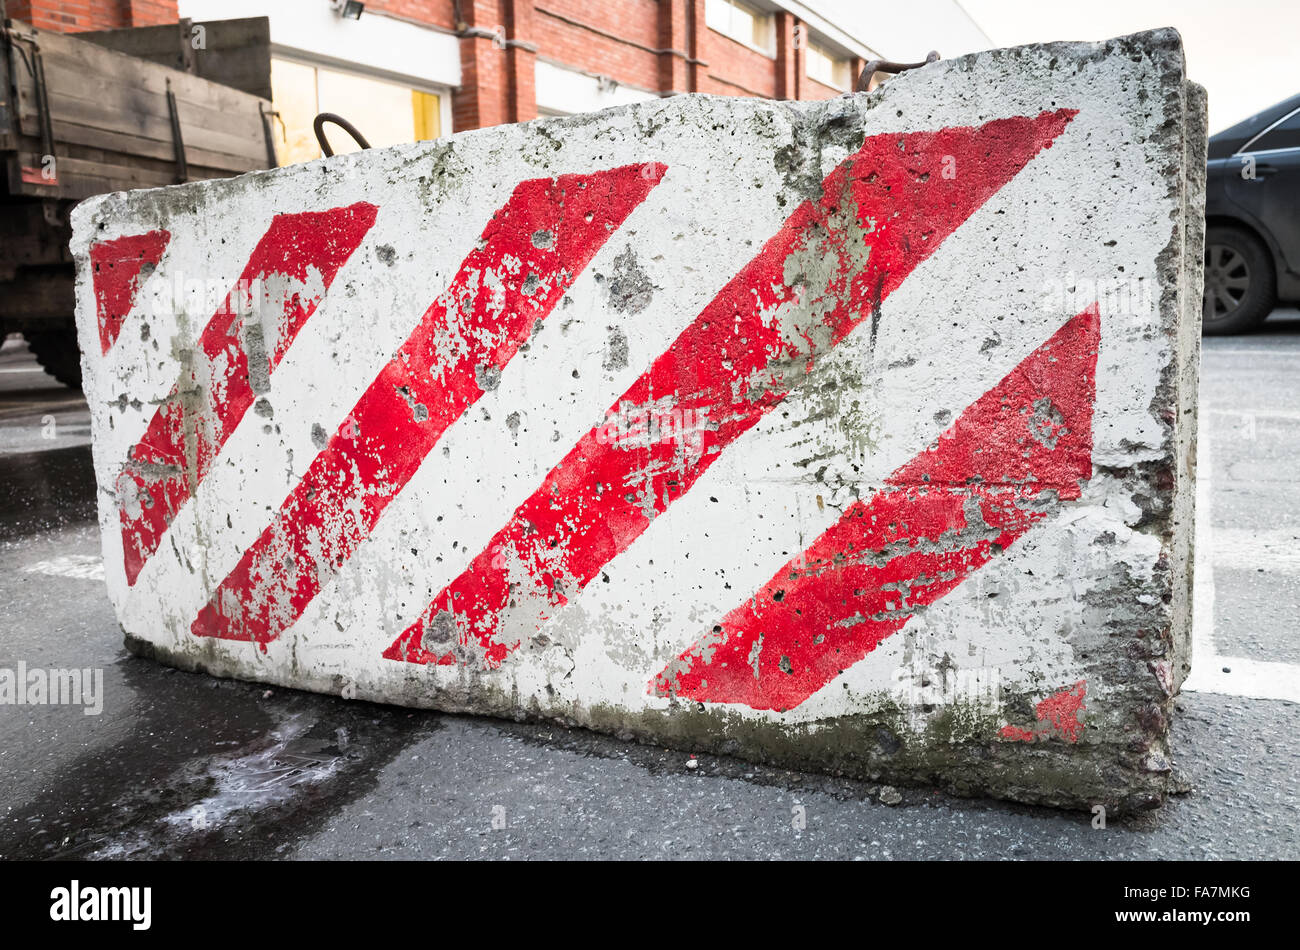 closeup photo of concrete road block with warning red and white diagonal striped pattern Stock Photo